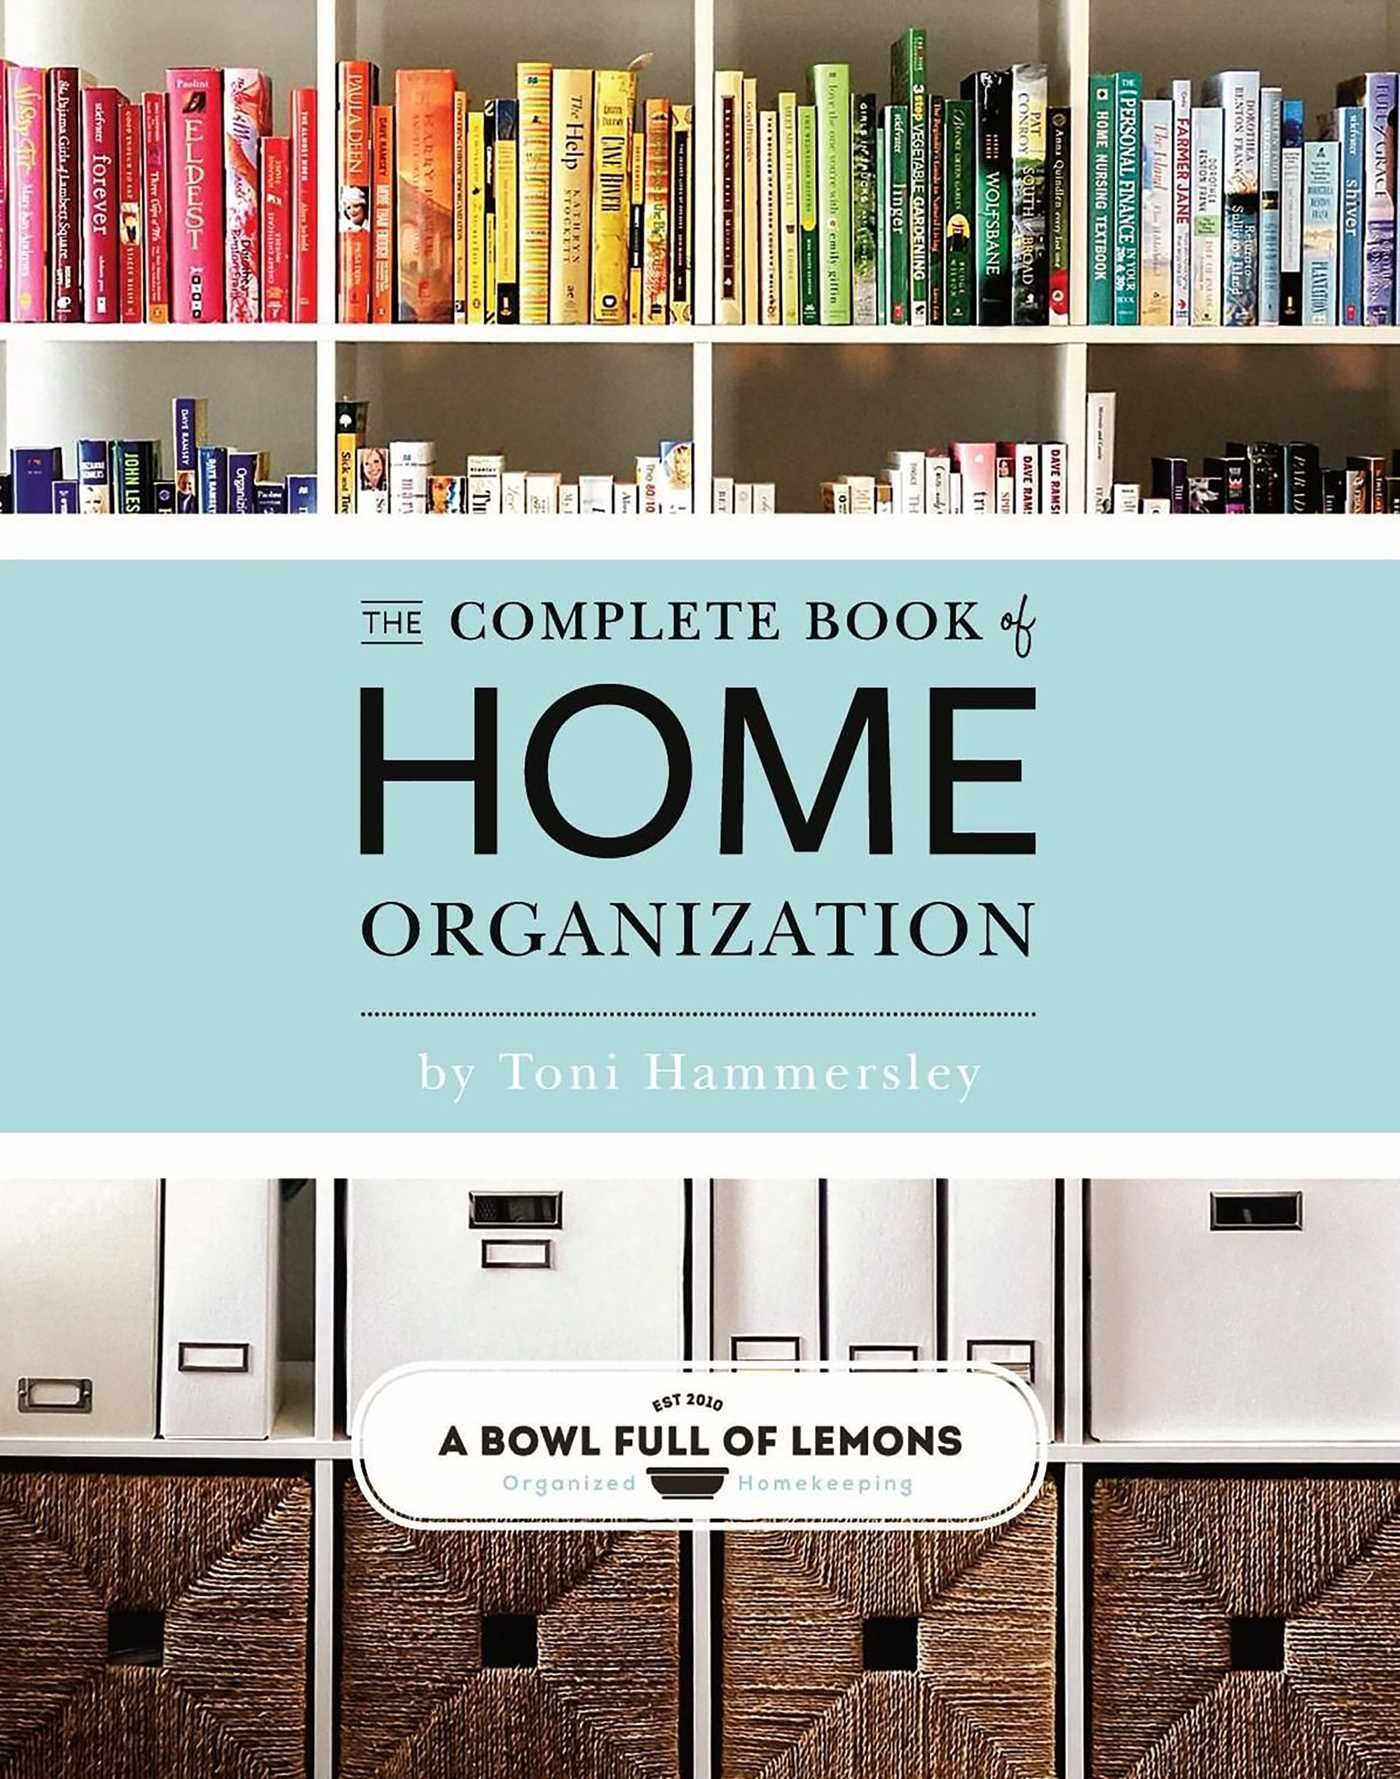 You are currently viewing The Complete Book of Home Organization by Toni Hammersley